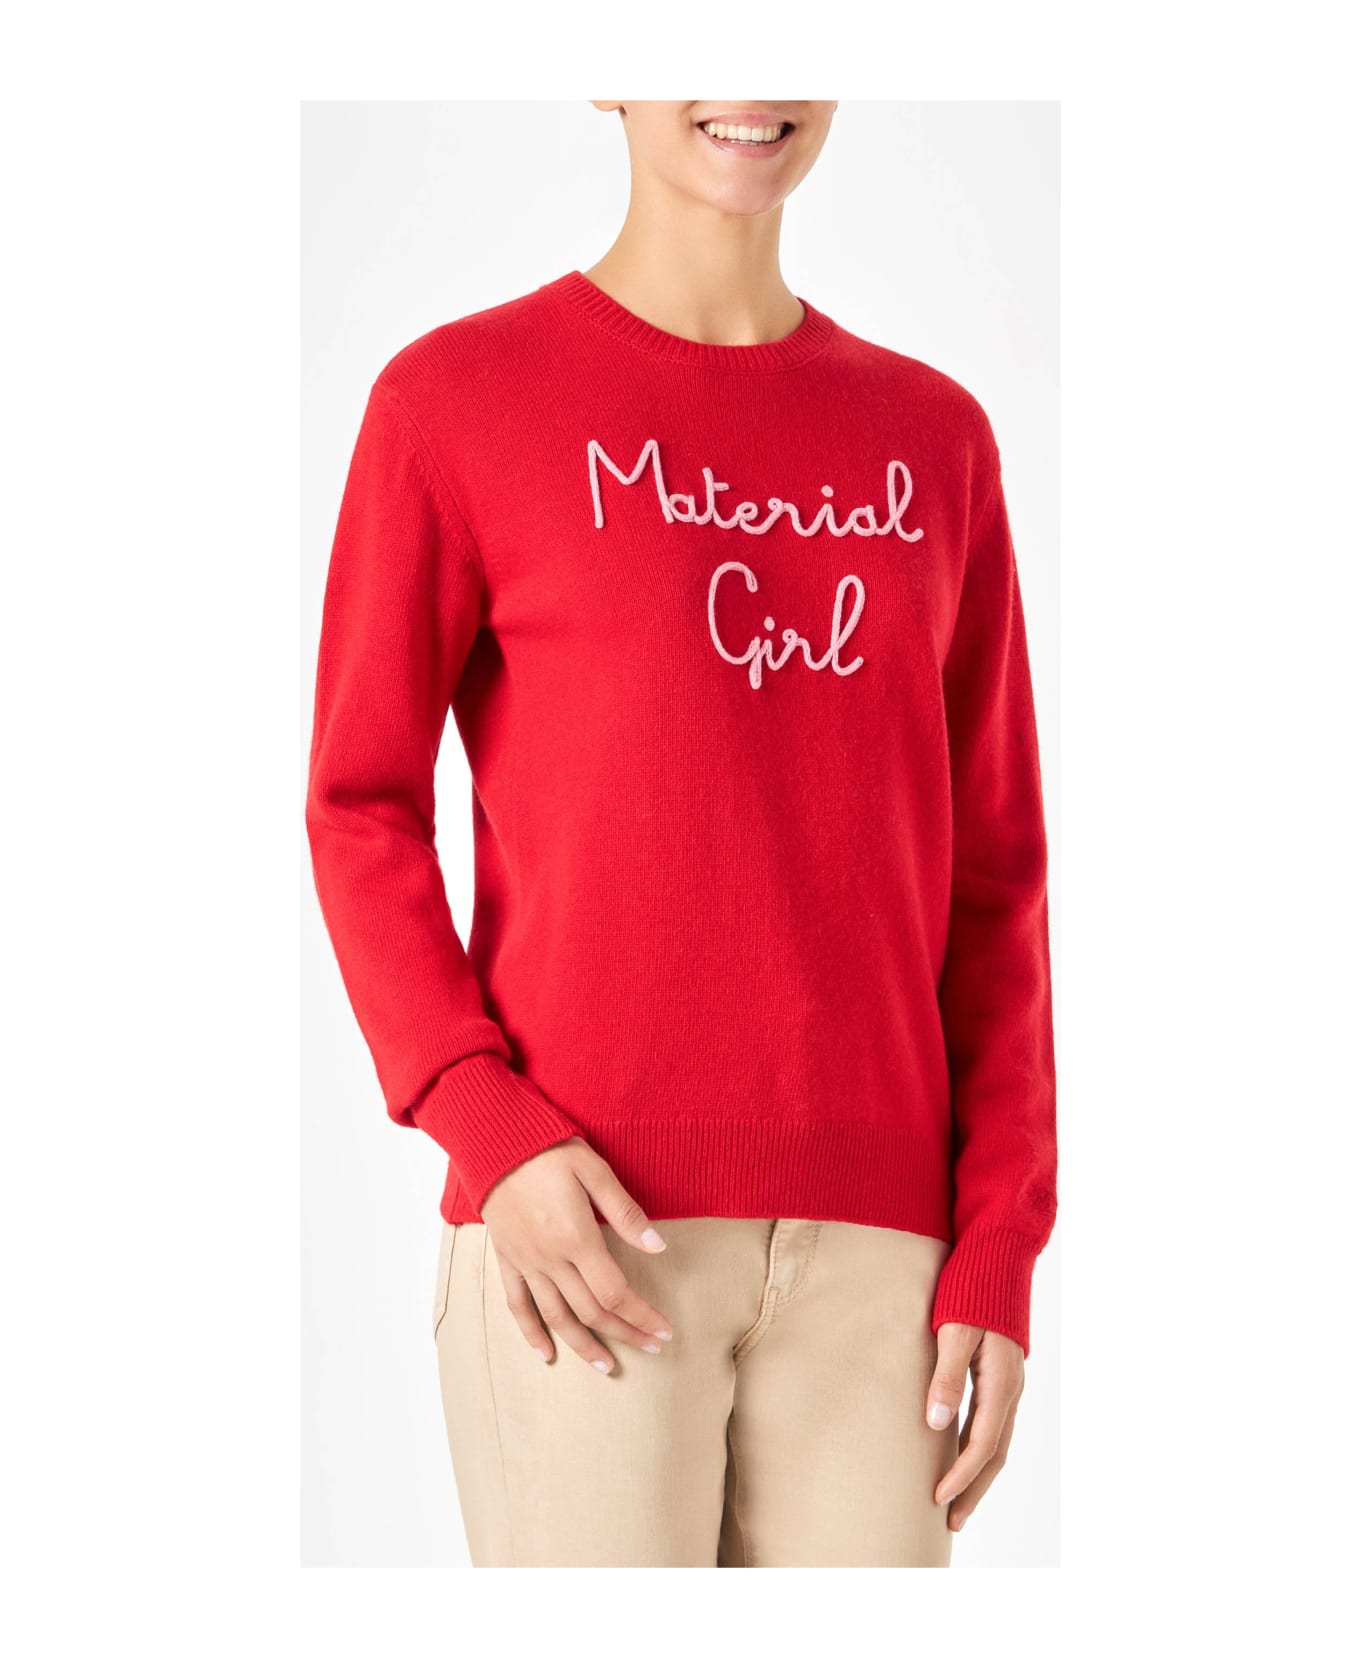 MC2 Saint Barth Woman Sweater With Material Girl Embroidery | Niki Dj Special Edition - RED